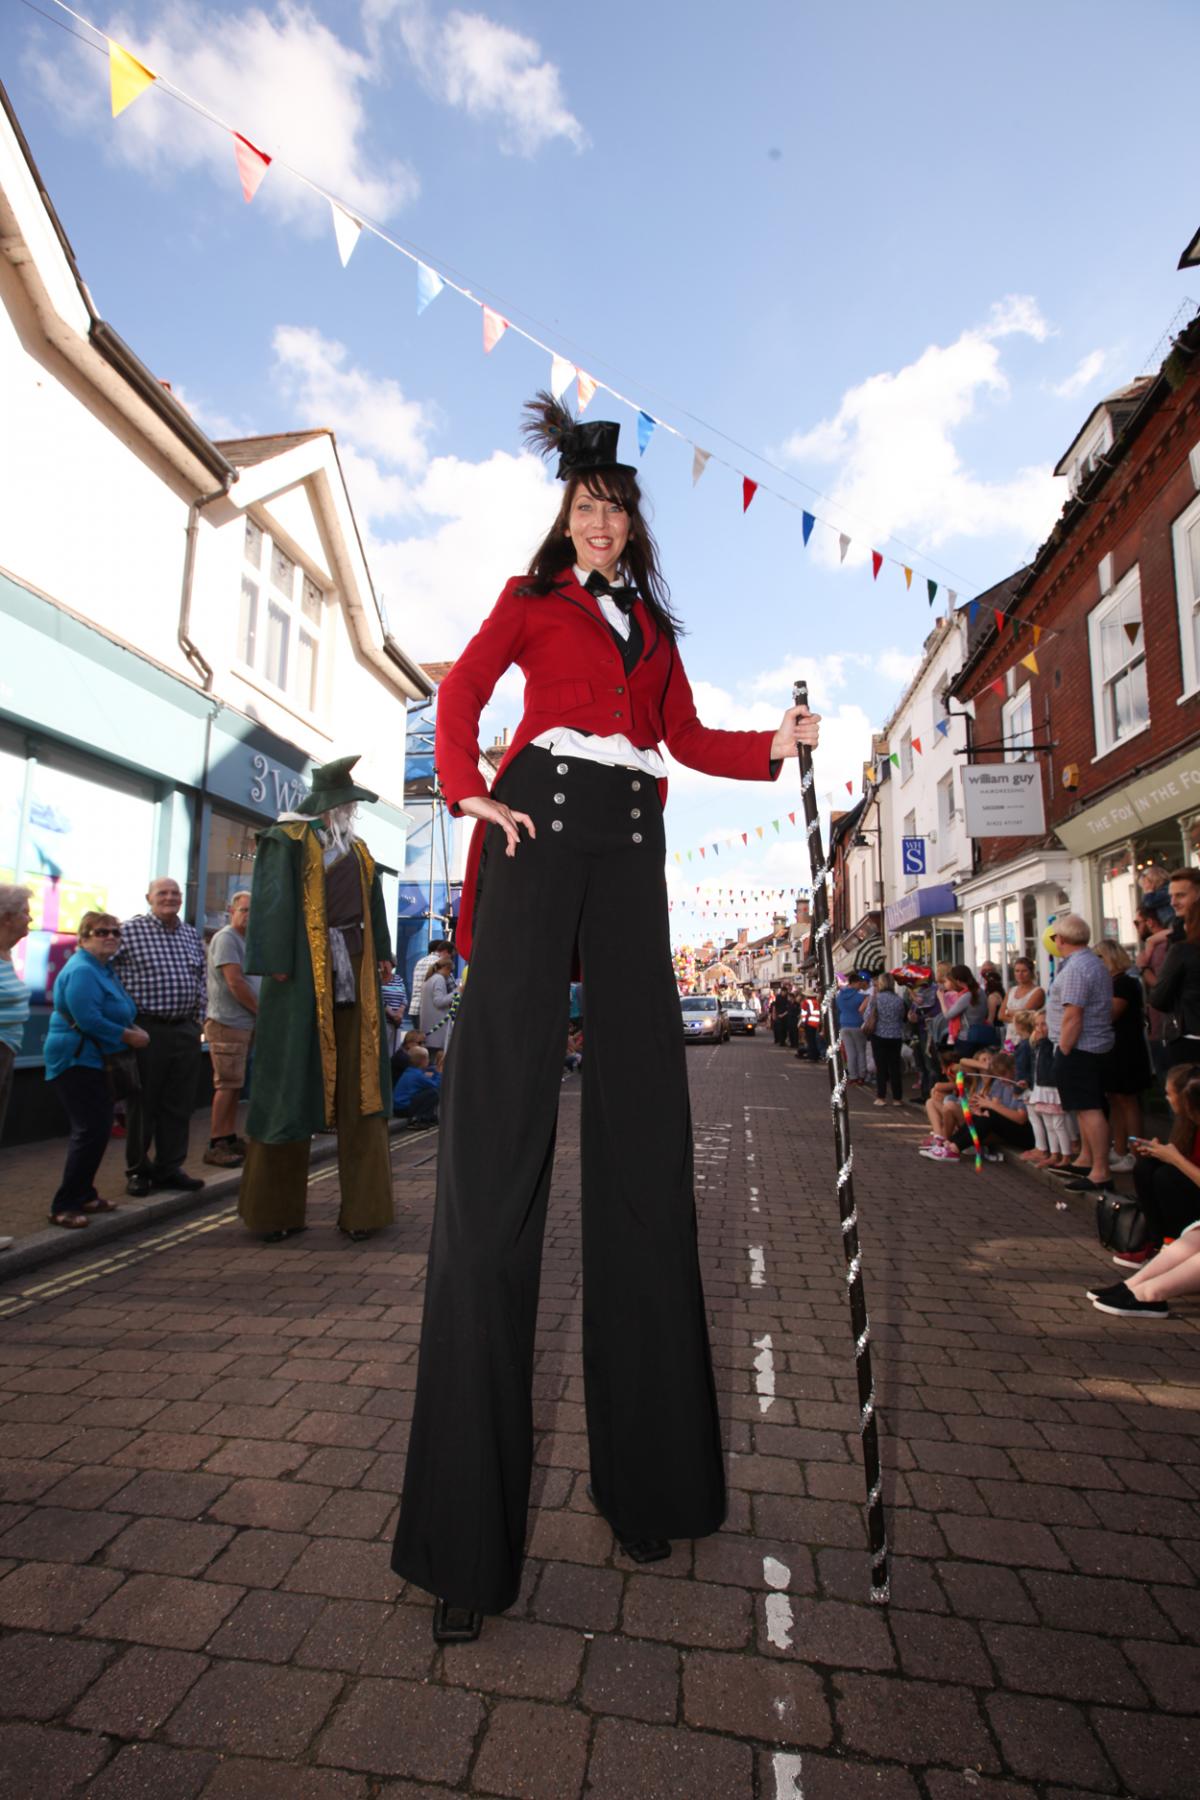 All the pictures from the 2015 Ringwood Carnival